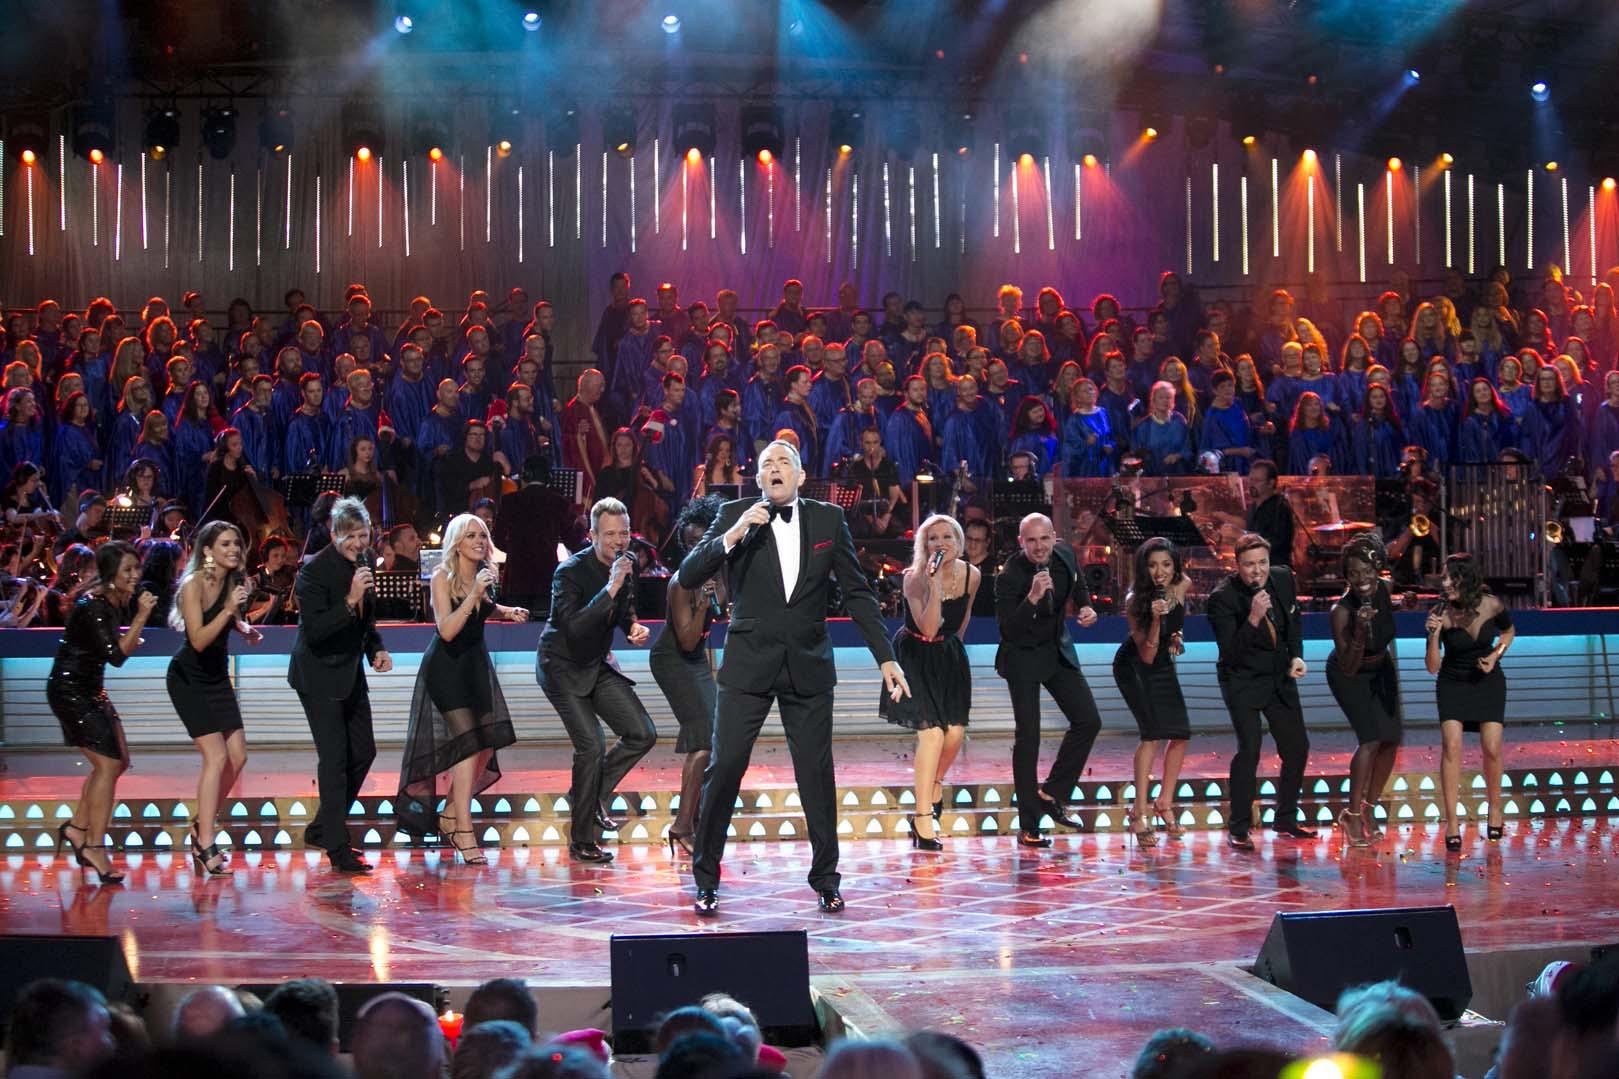 Darren Percival performs on stage wearing a black suit and the Melbourne Gospel Choir wearing black suits and dresses